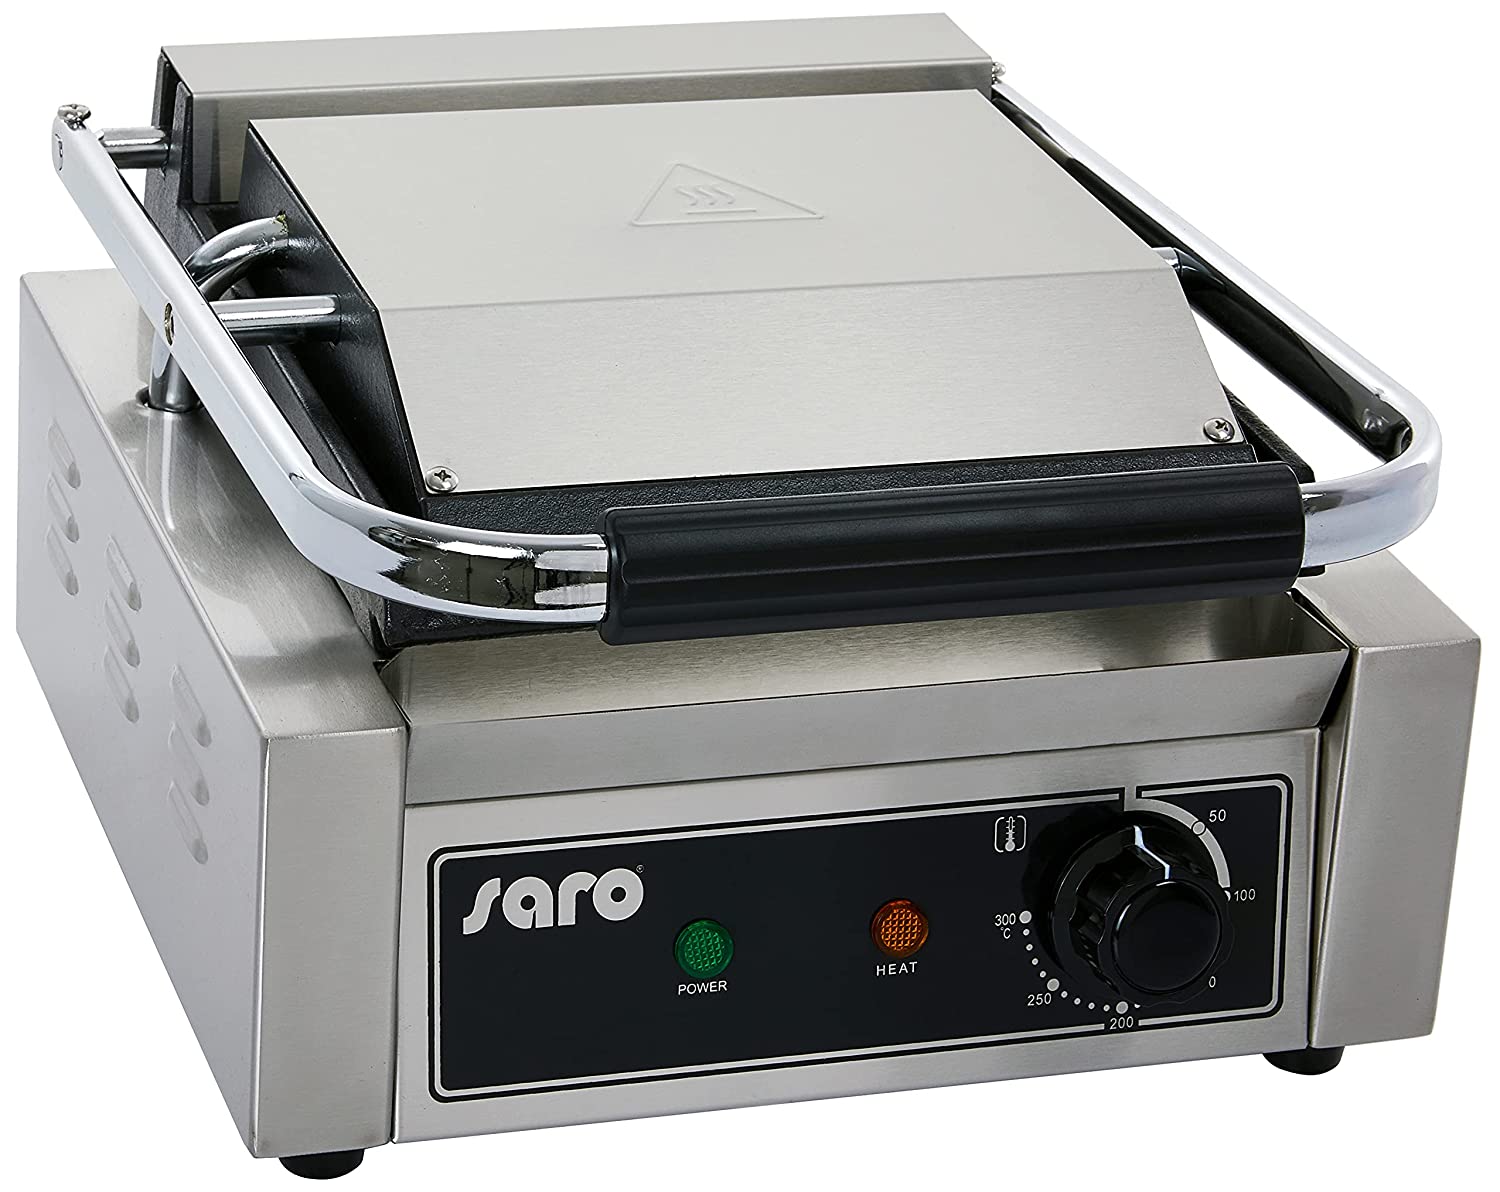 SARO Electric Contact Grill PG 1